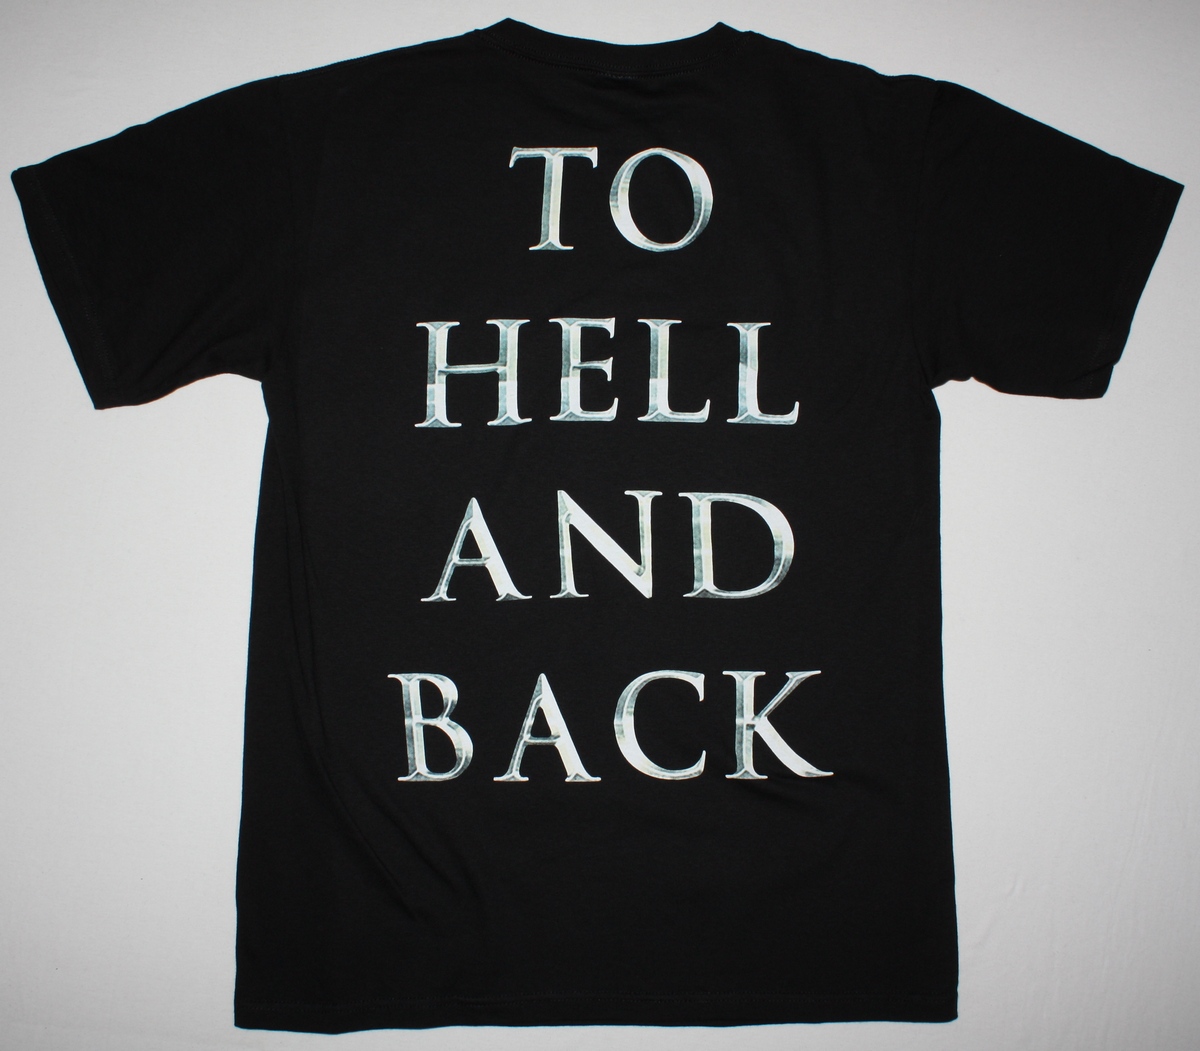 SABATON HEROES 2014 TO THE HELL AND BACK NEW BLACK T-SHIRT